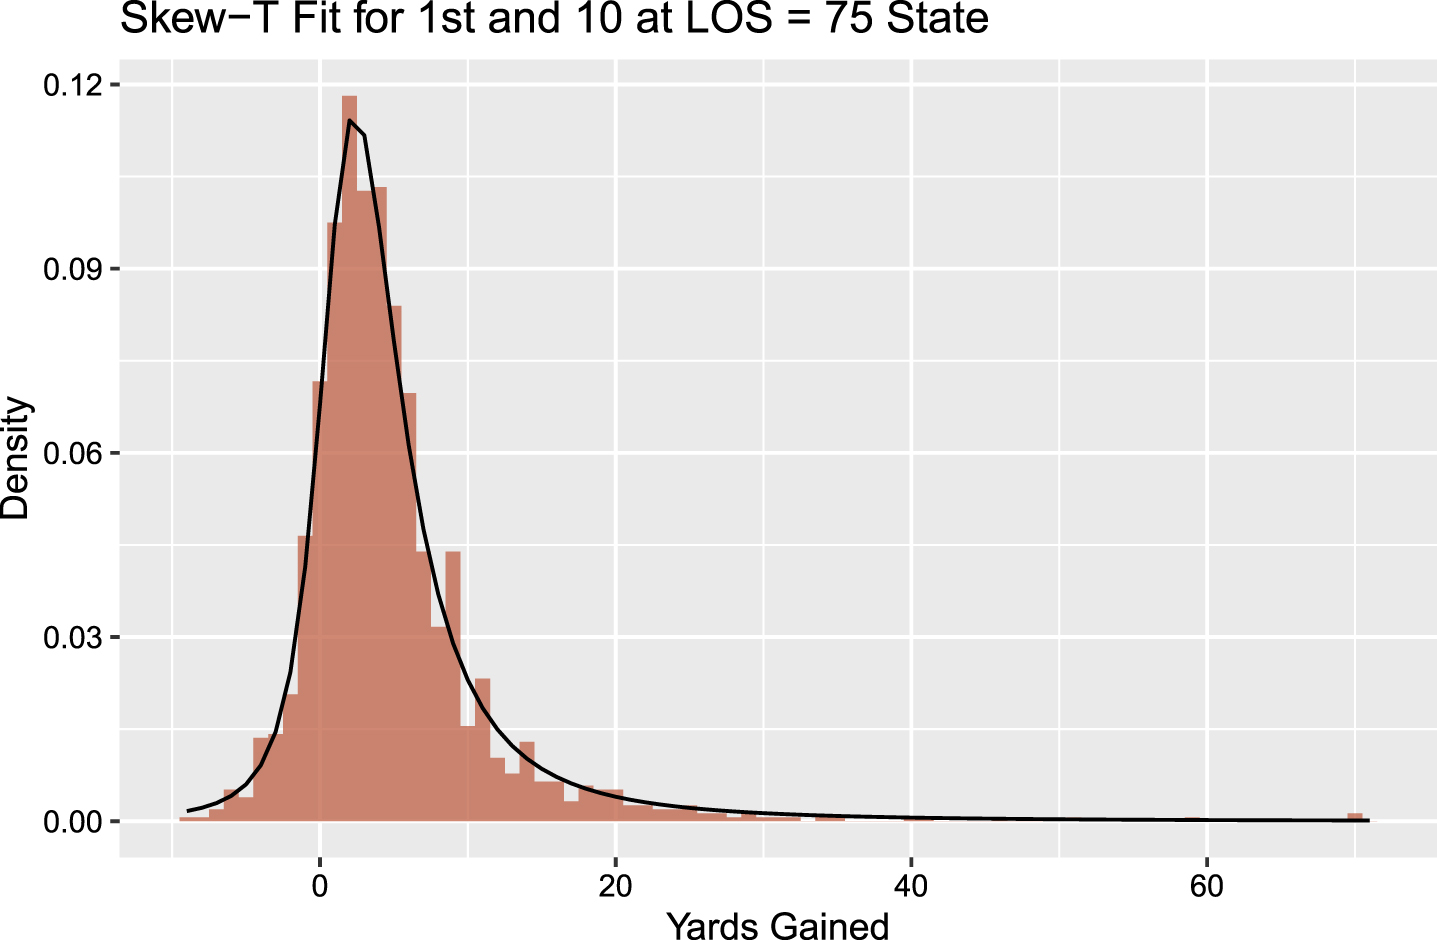 Skew-t fit for most common state, with the histogram bars indicating the amount of yards gained on observed plays and the black line indicating the predictive density.